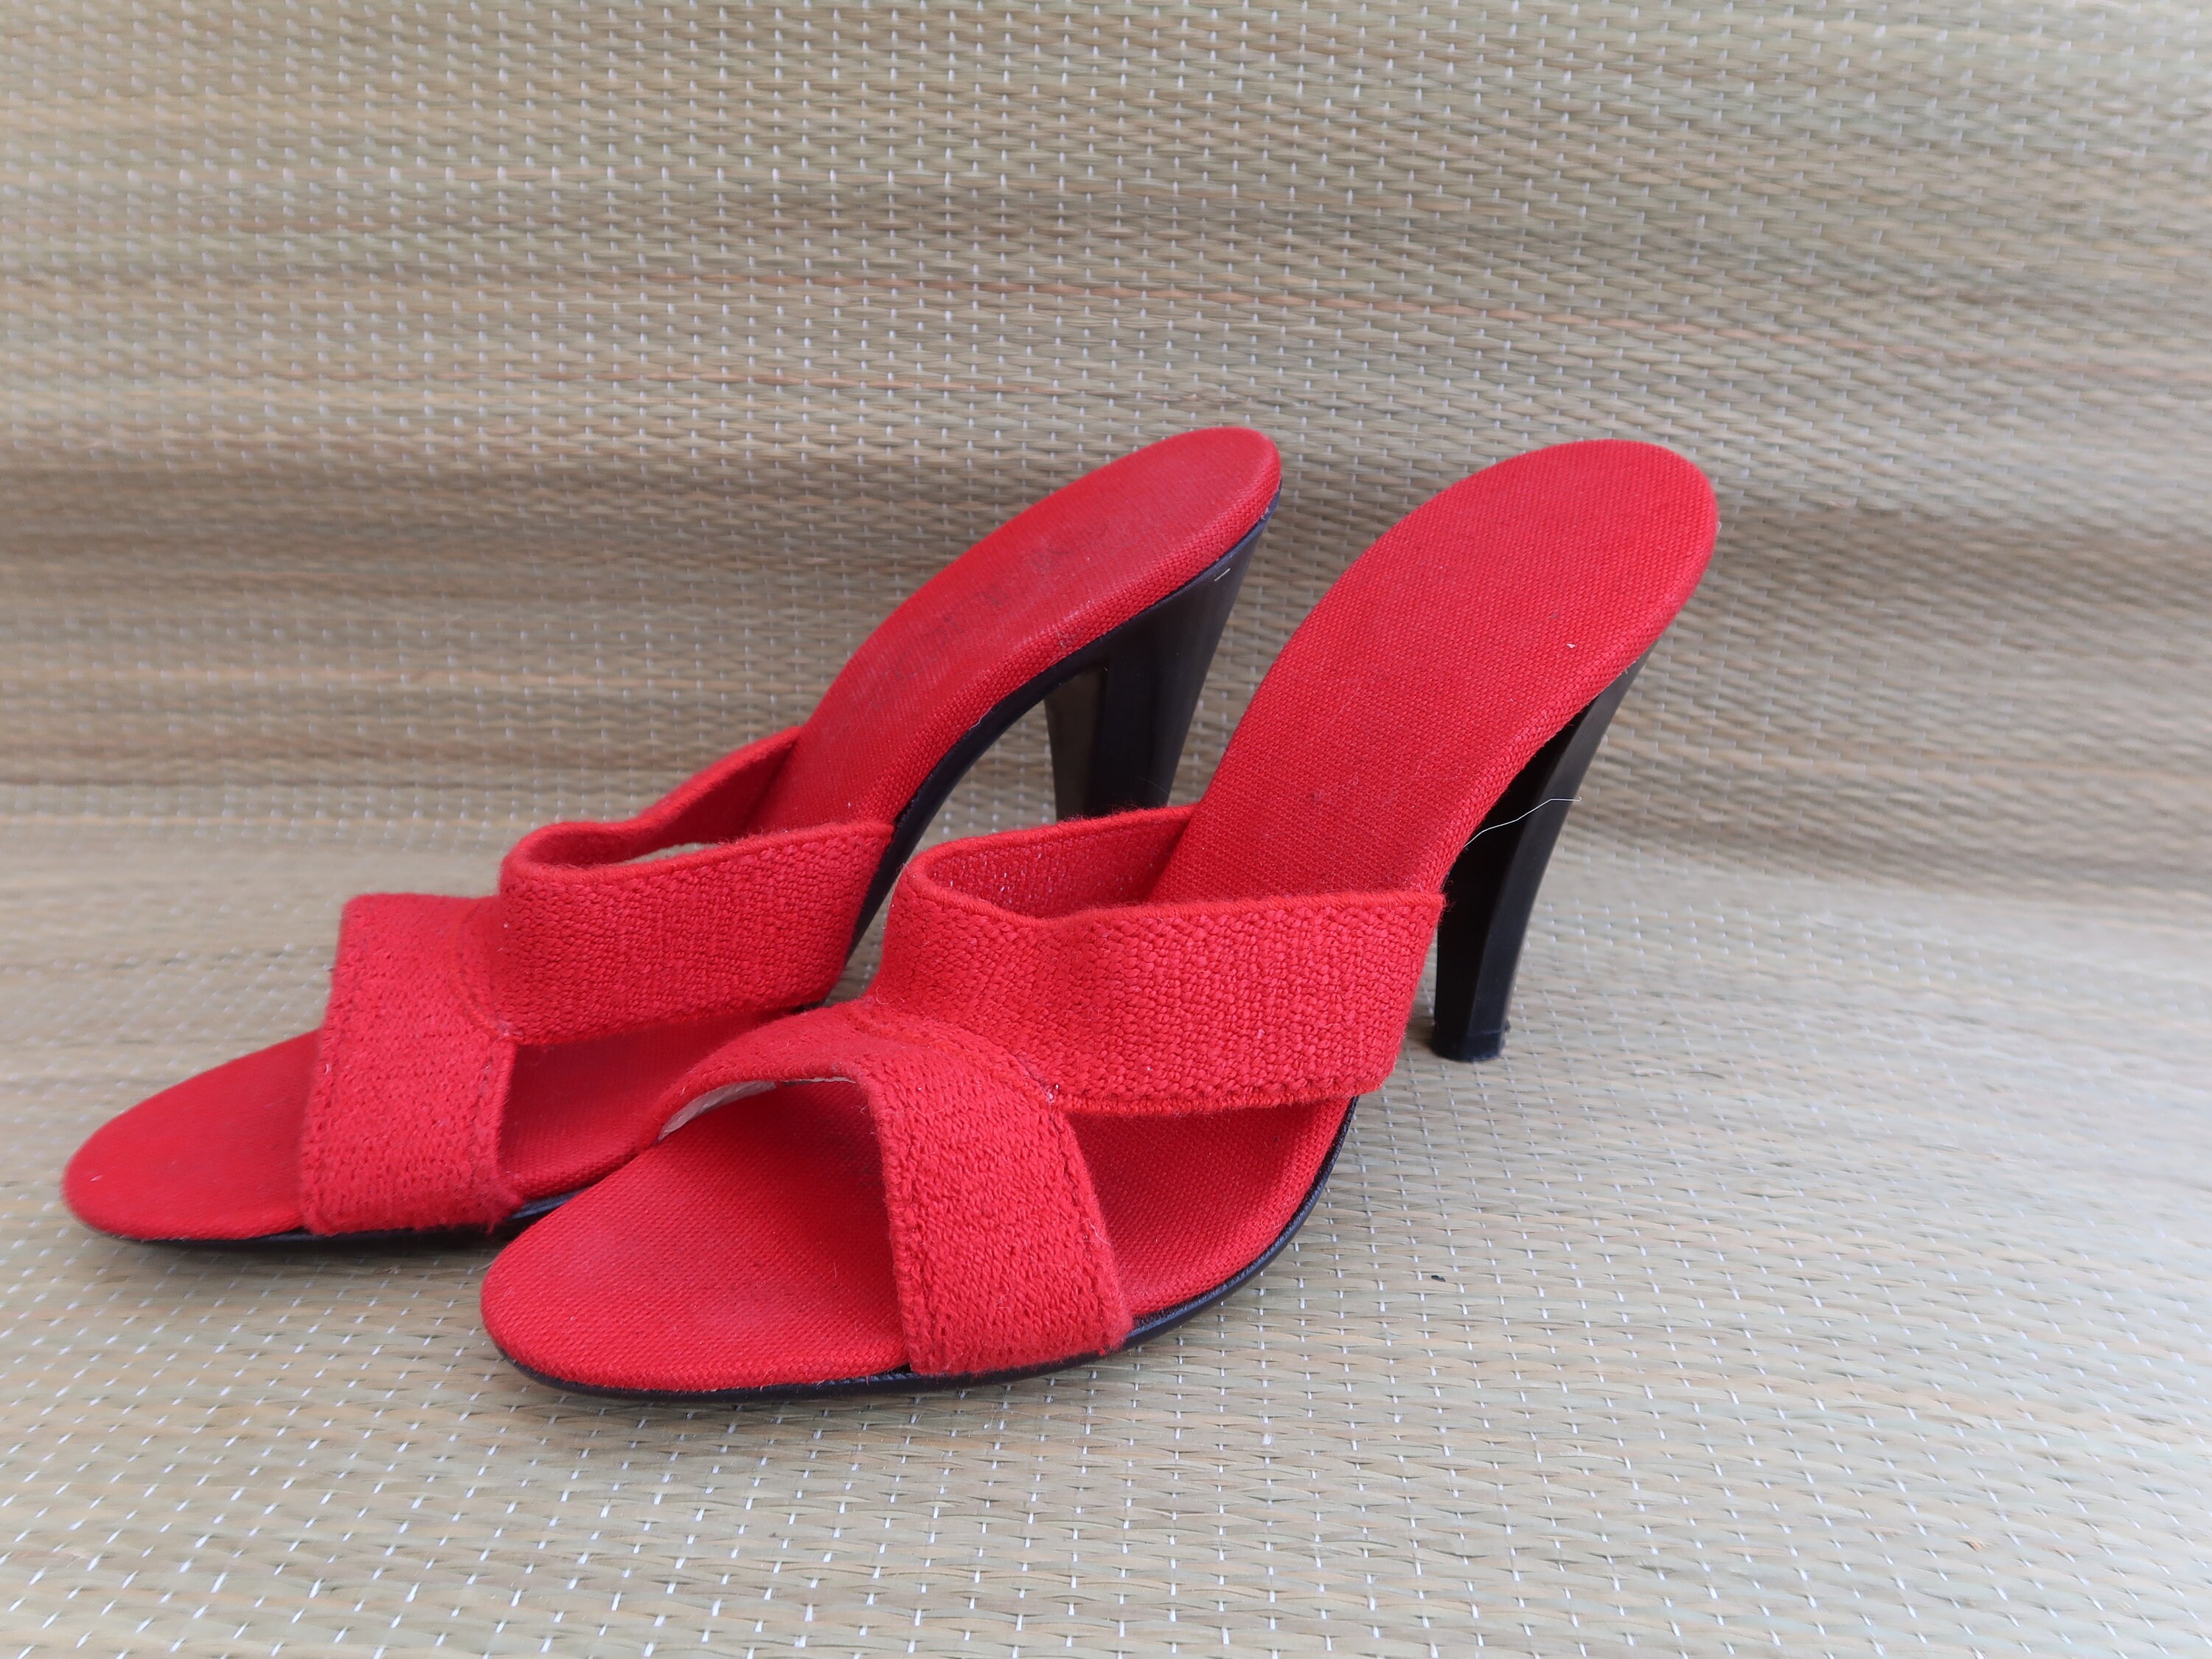 1980s Vintage 80s Stretchy Red Elastic and Black Sexy Sandal | Etsy